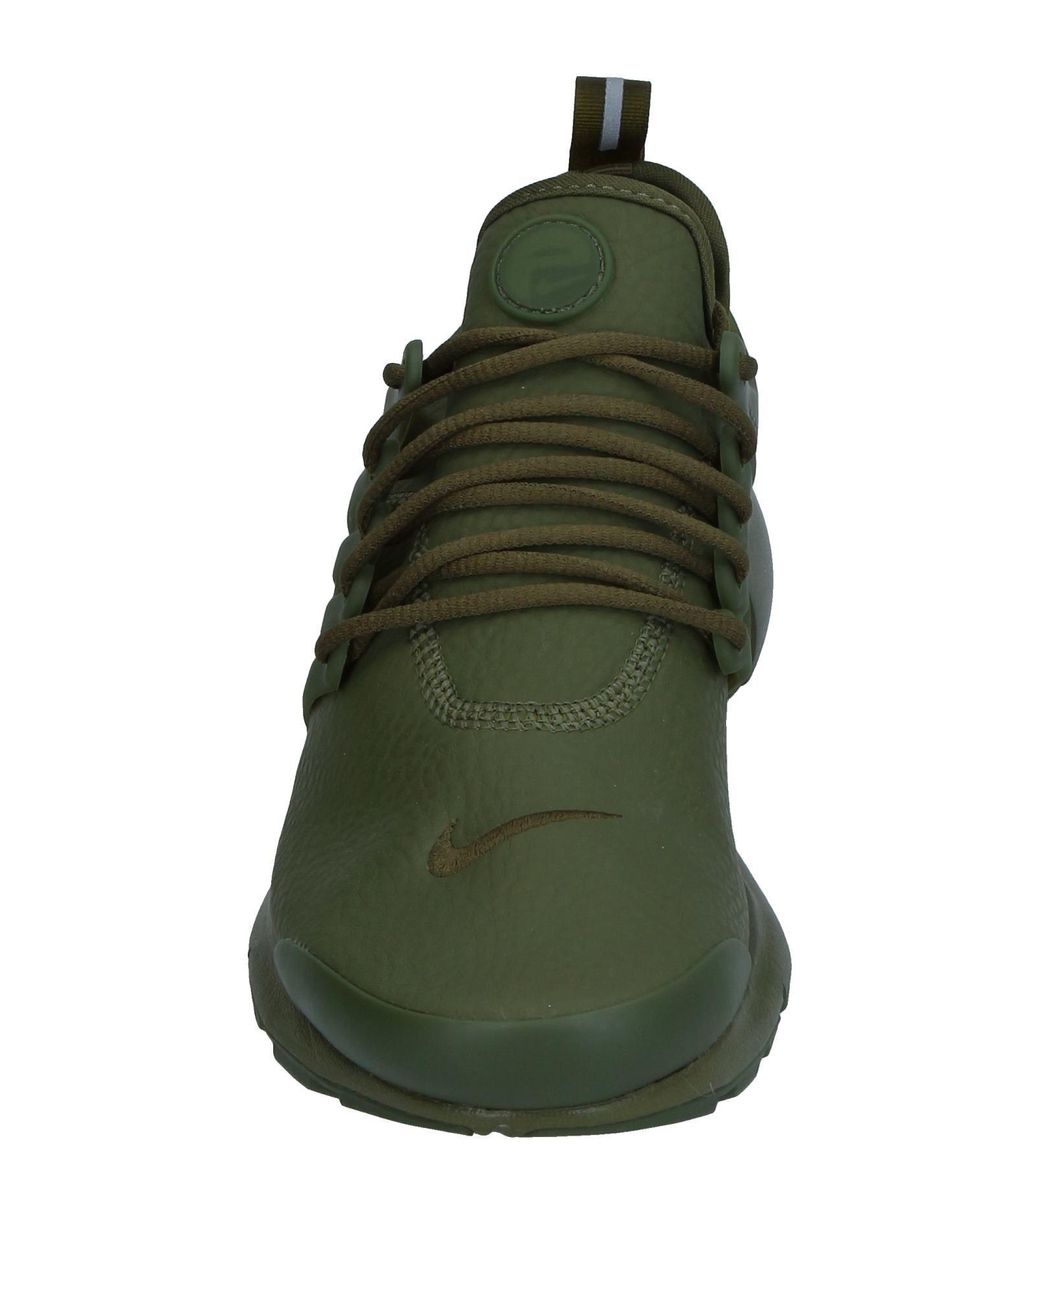 Nike Low-tops & Sneakers in Military Green (Green) | Lyst